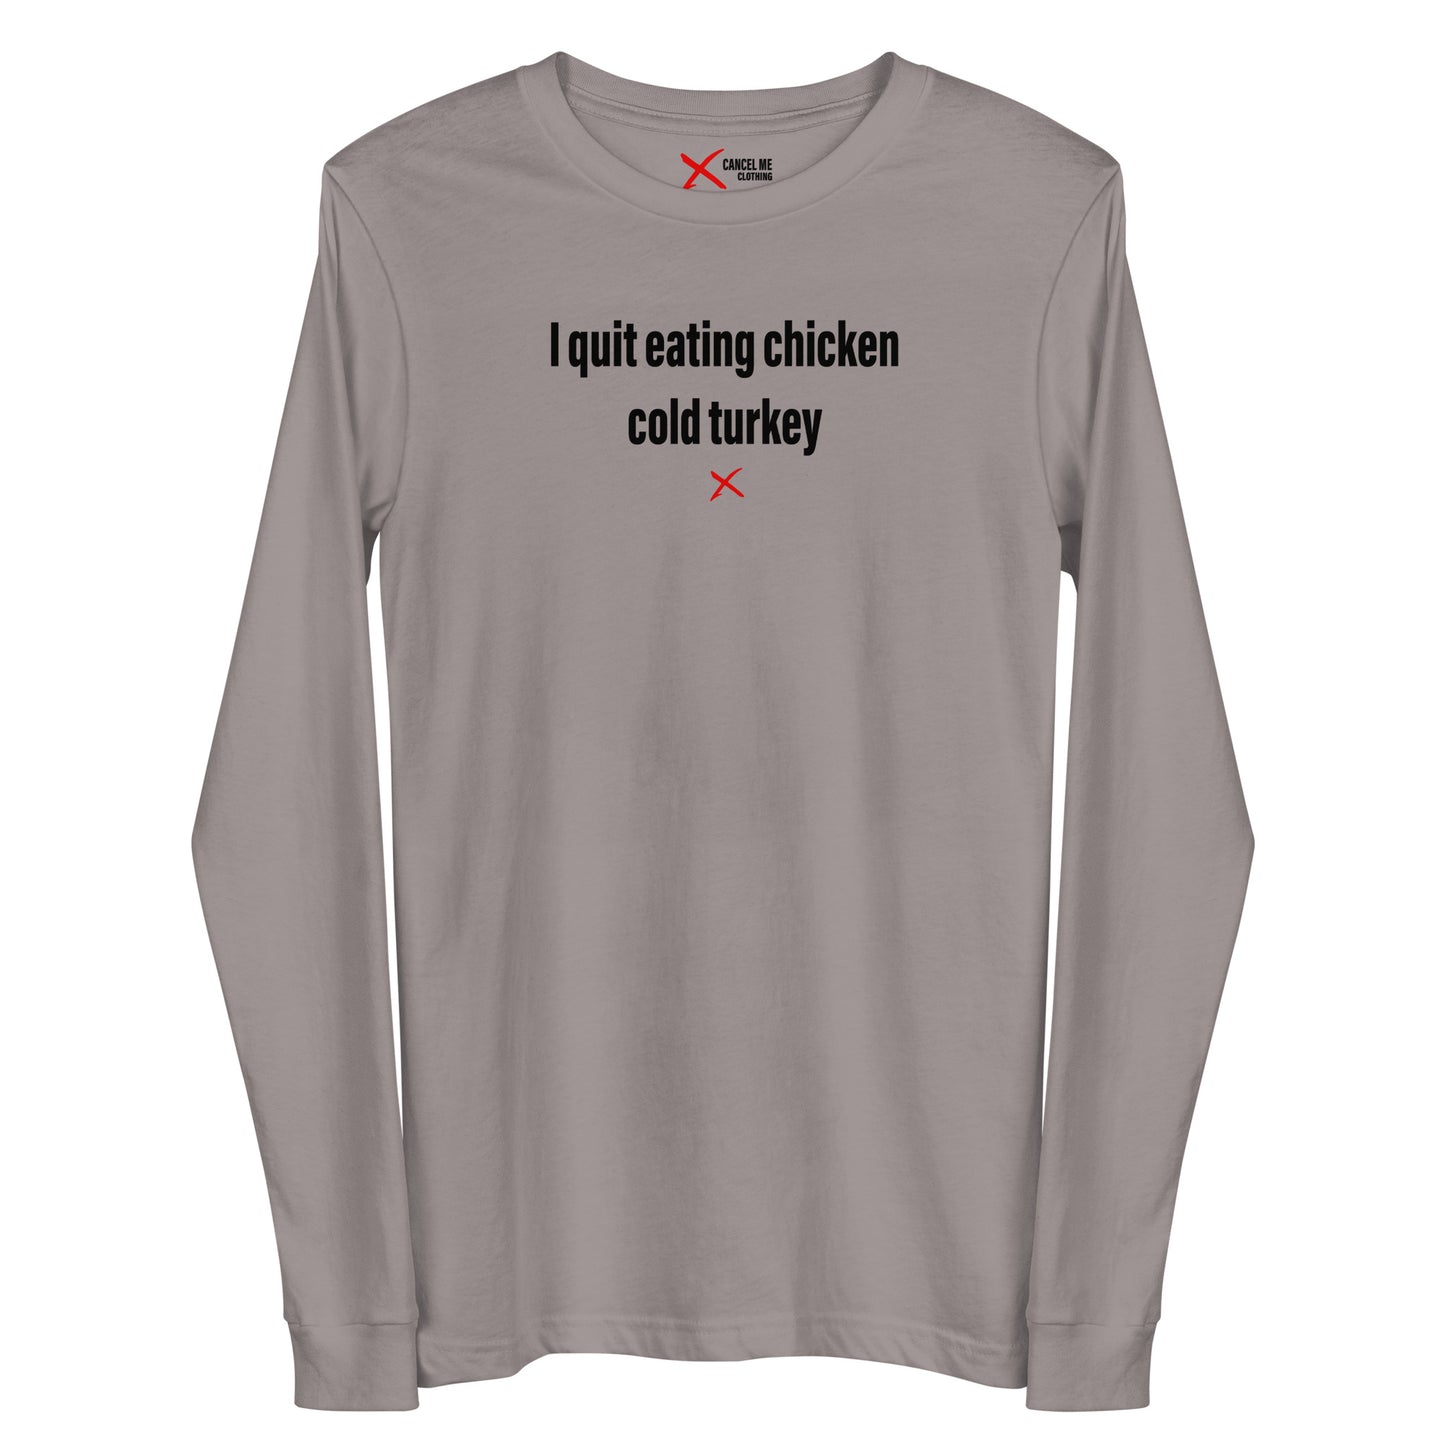 I quit eating chicken cold turkey - Longsleeve